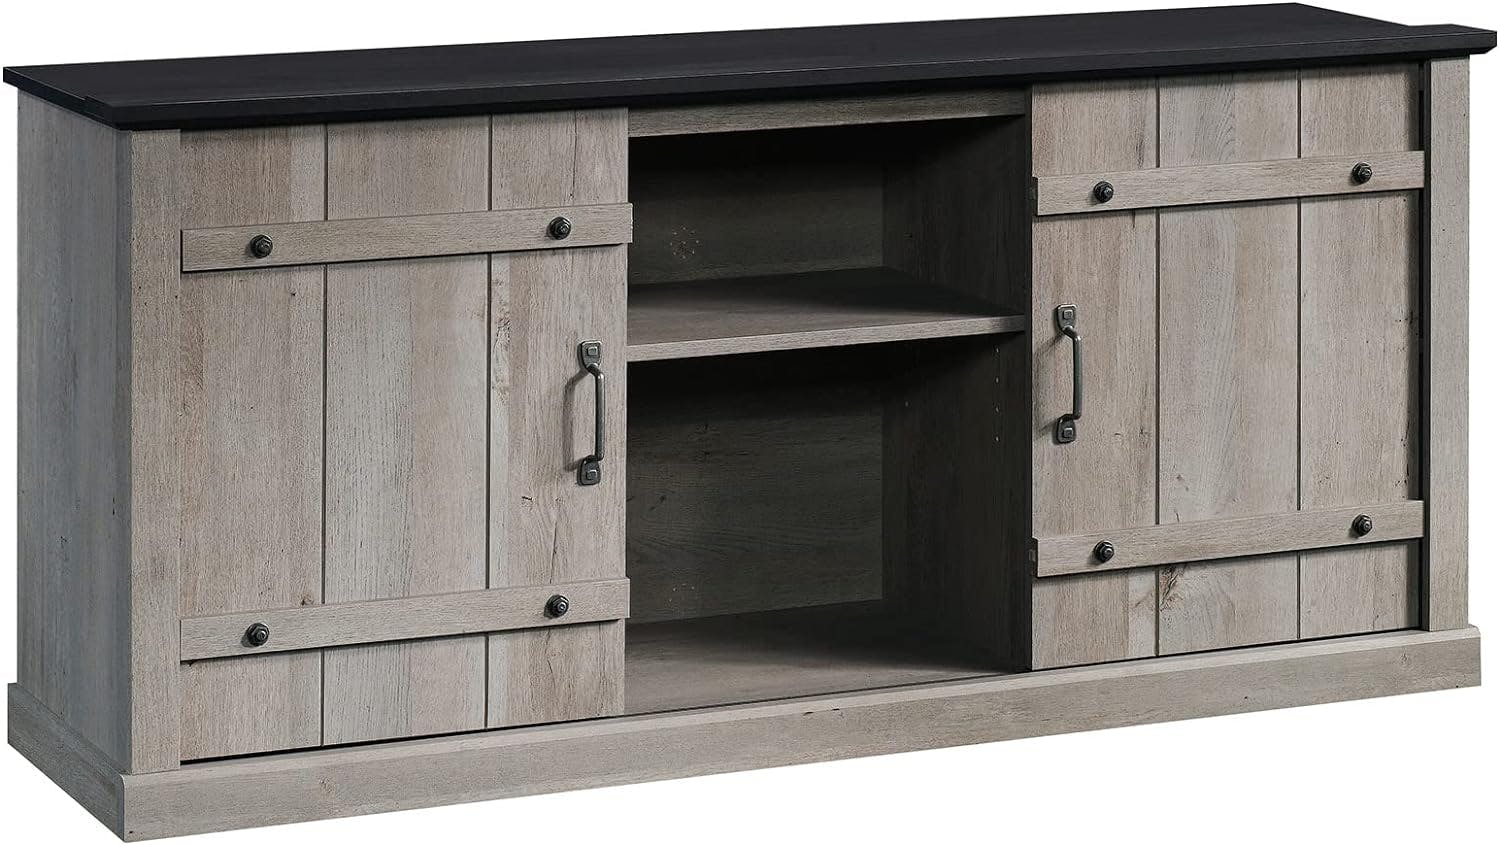 Mystic Oak and Raven Black 70" Farmhouse TV Stand with Barn Doors